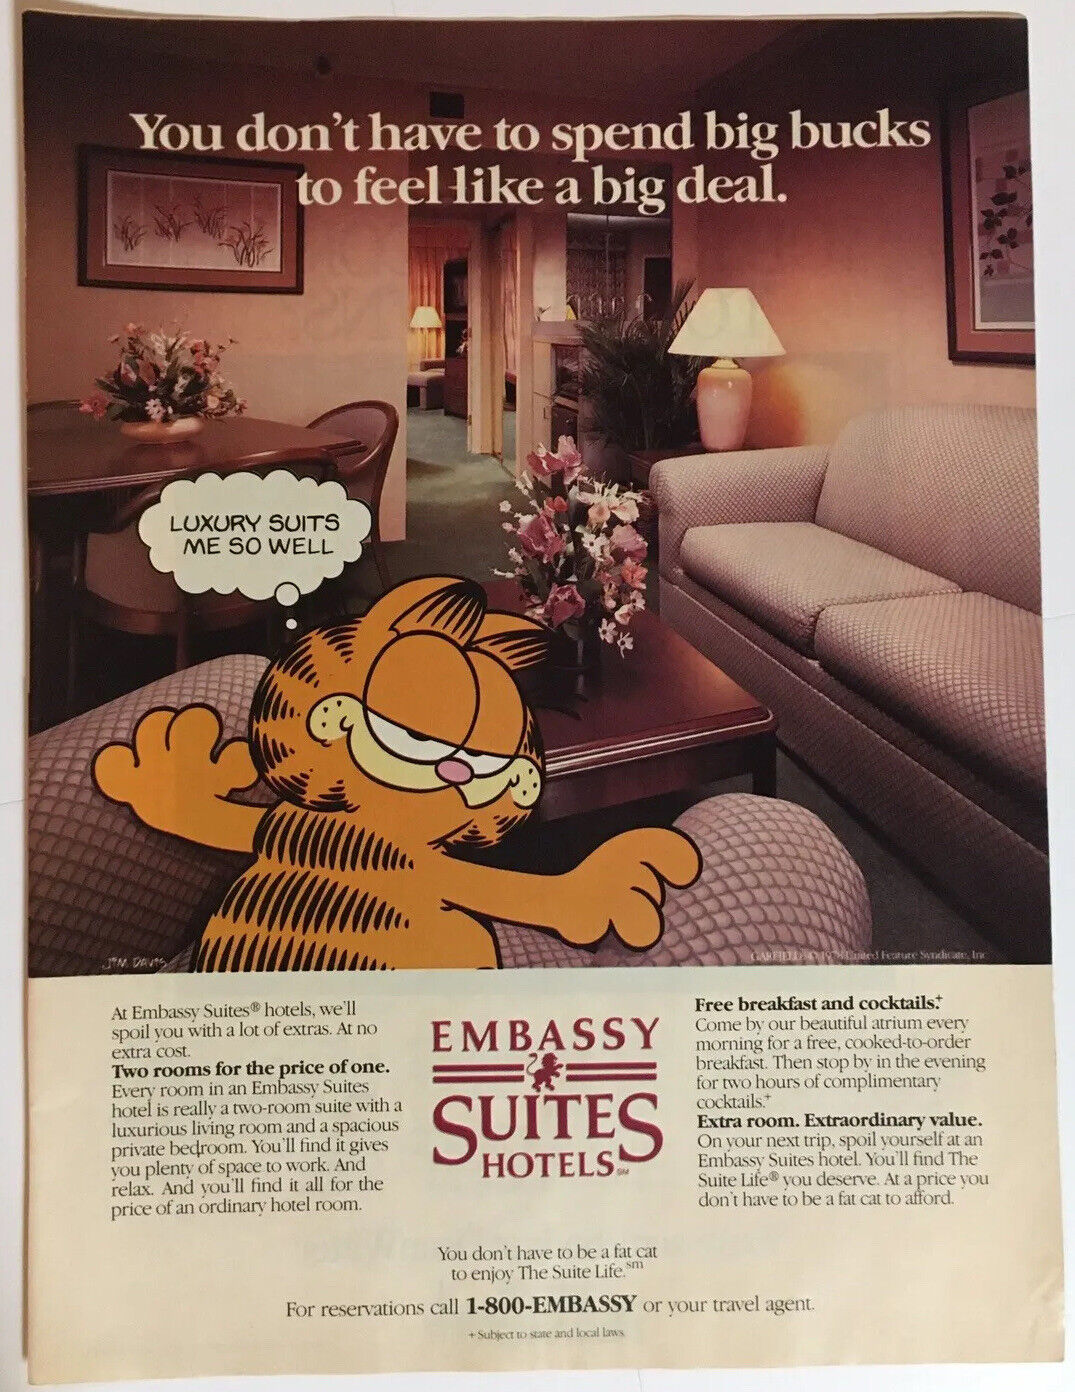 Garfield Embassy Suites 1987 Vintage Print Ad 8x11 Inches Wall Decor